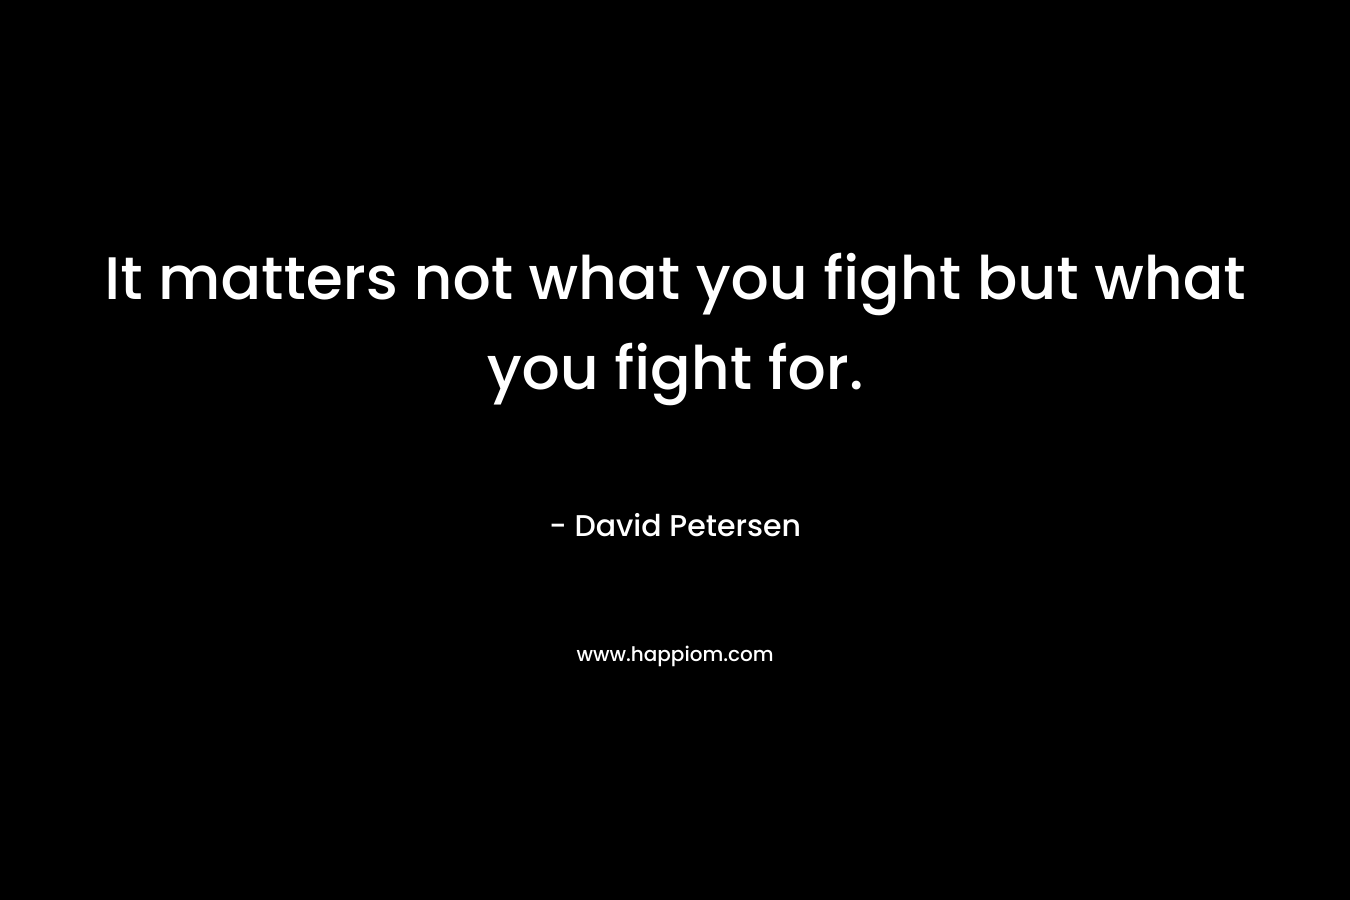 It matters not what you fight but what you fight for.